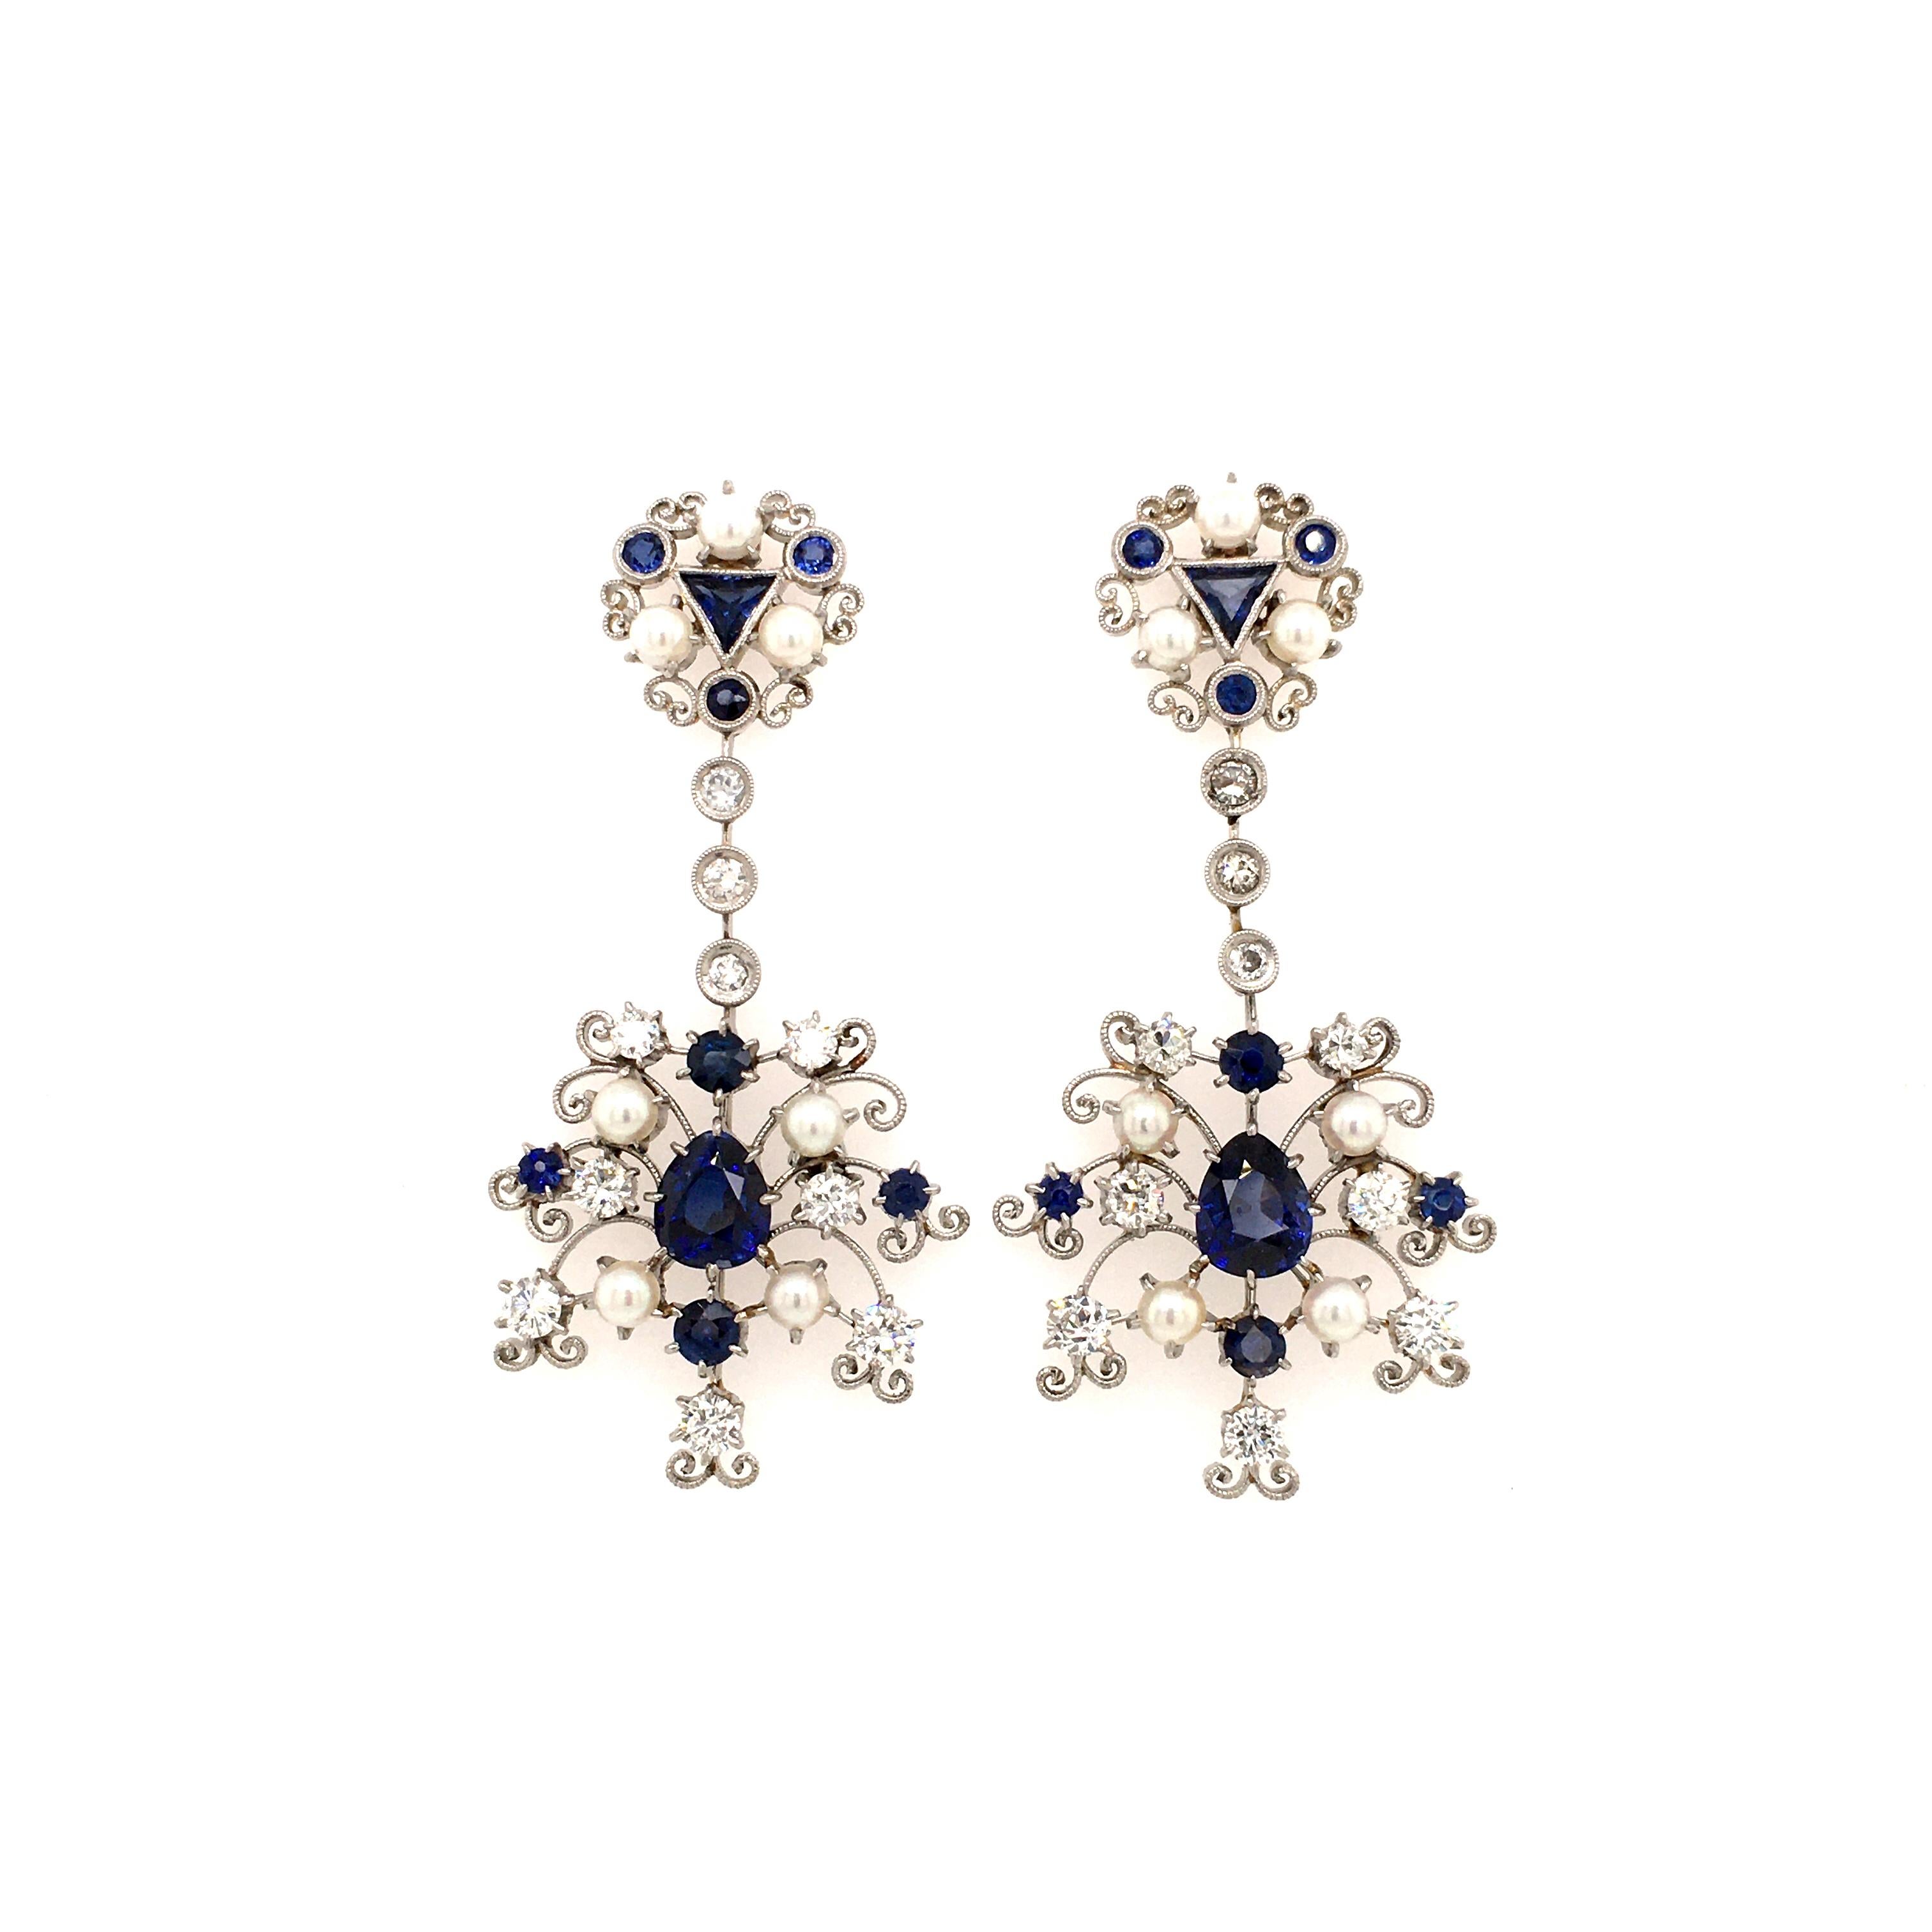 Modern Platinum Earstuds with Sapphires, Diamonds, and Cultured Pearls